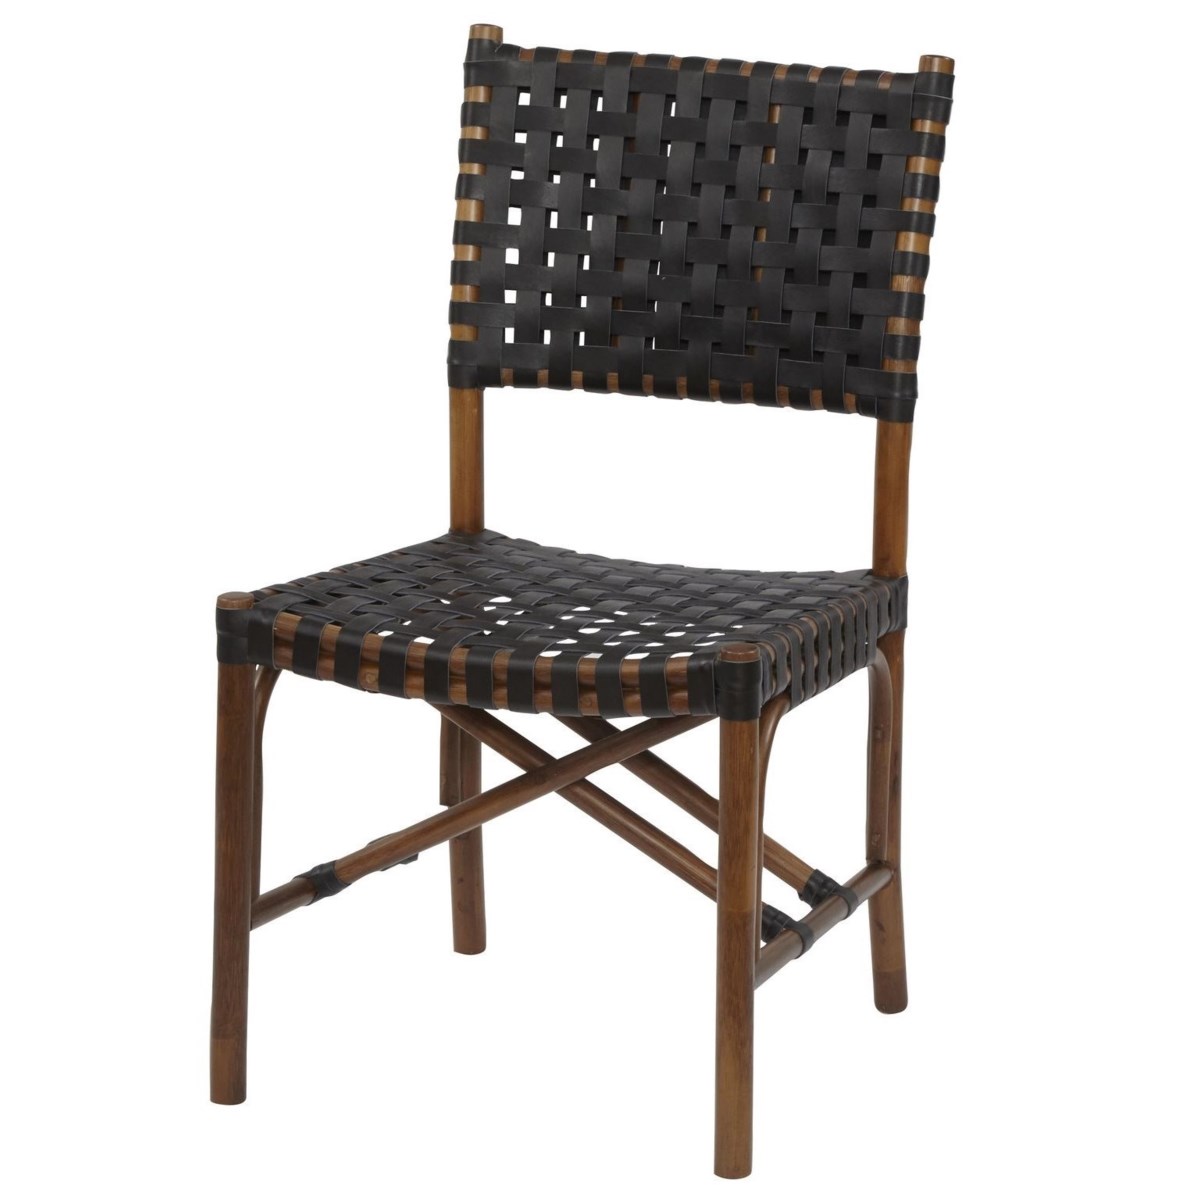 Malibu Side Chair Frame Color - Cocoa Leather Color - Black CLOSE-OUT - 50% OFF!SOLD AS-IS  ~